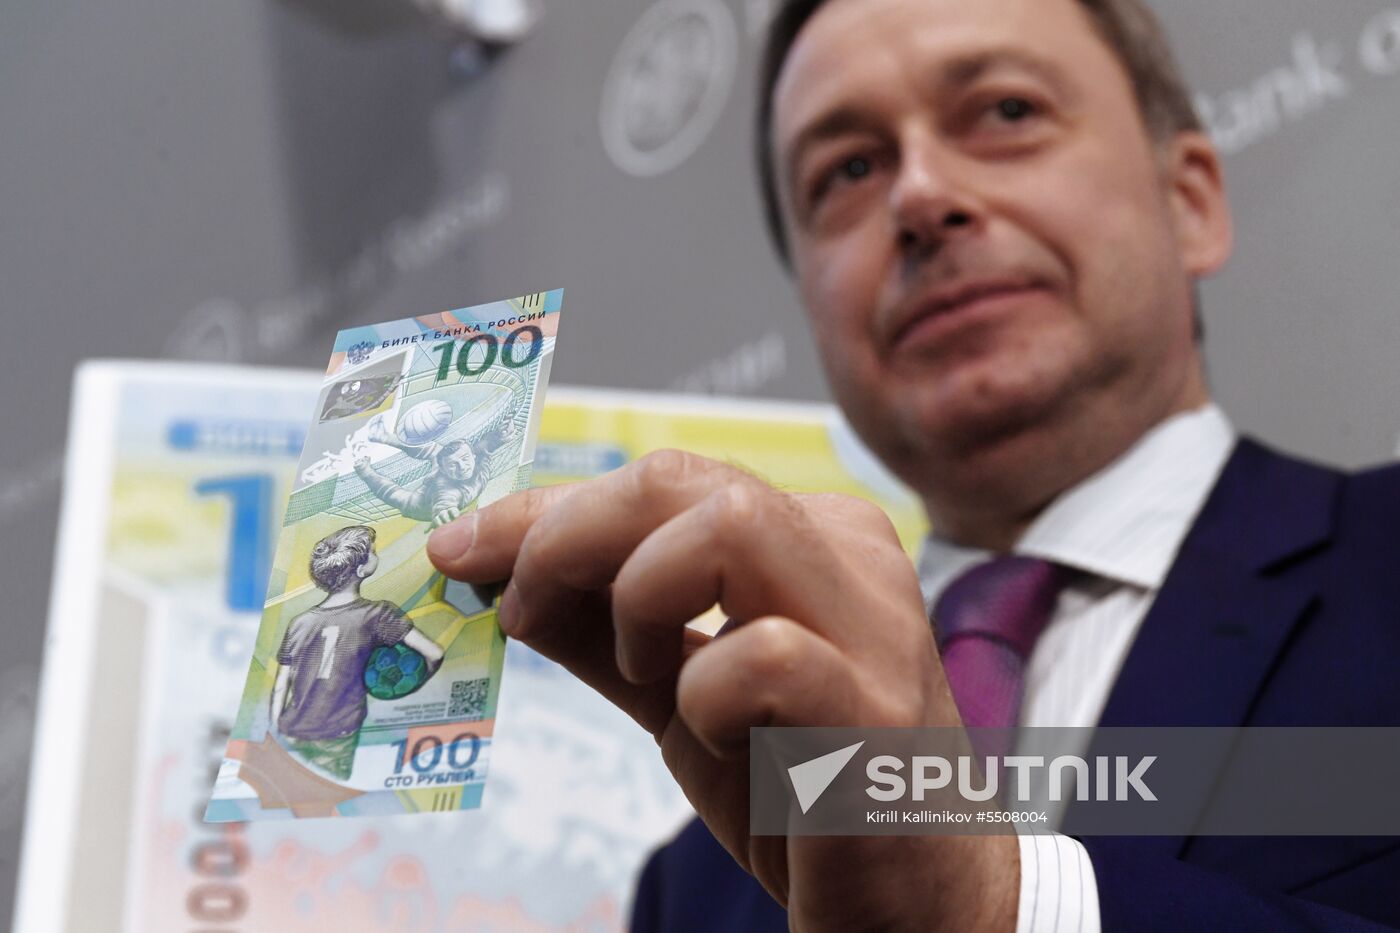 Bank of Russia issues 2018 FIFA World Cup banknote